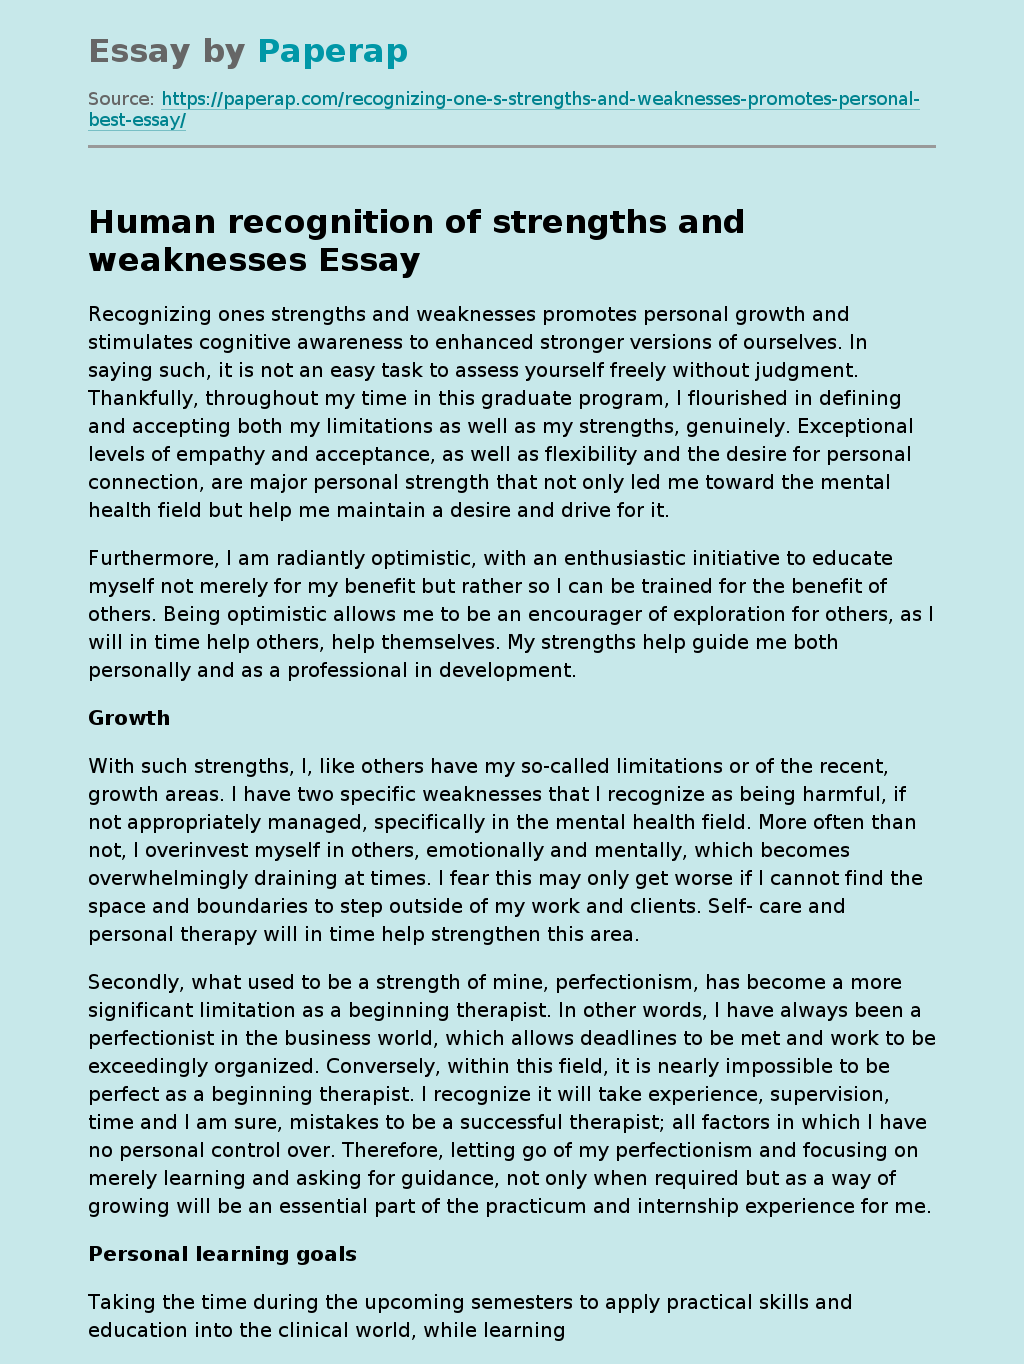 Human recognition of strengths and weaknesses